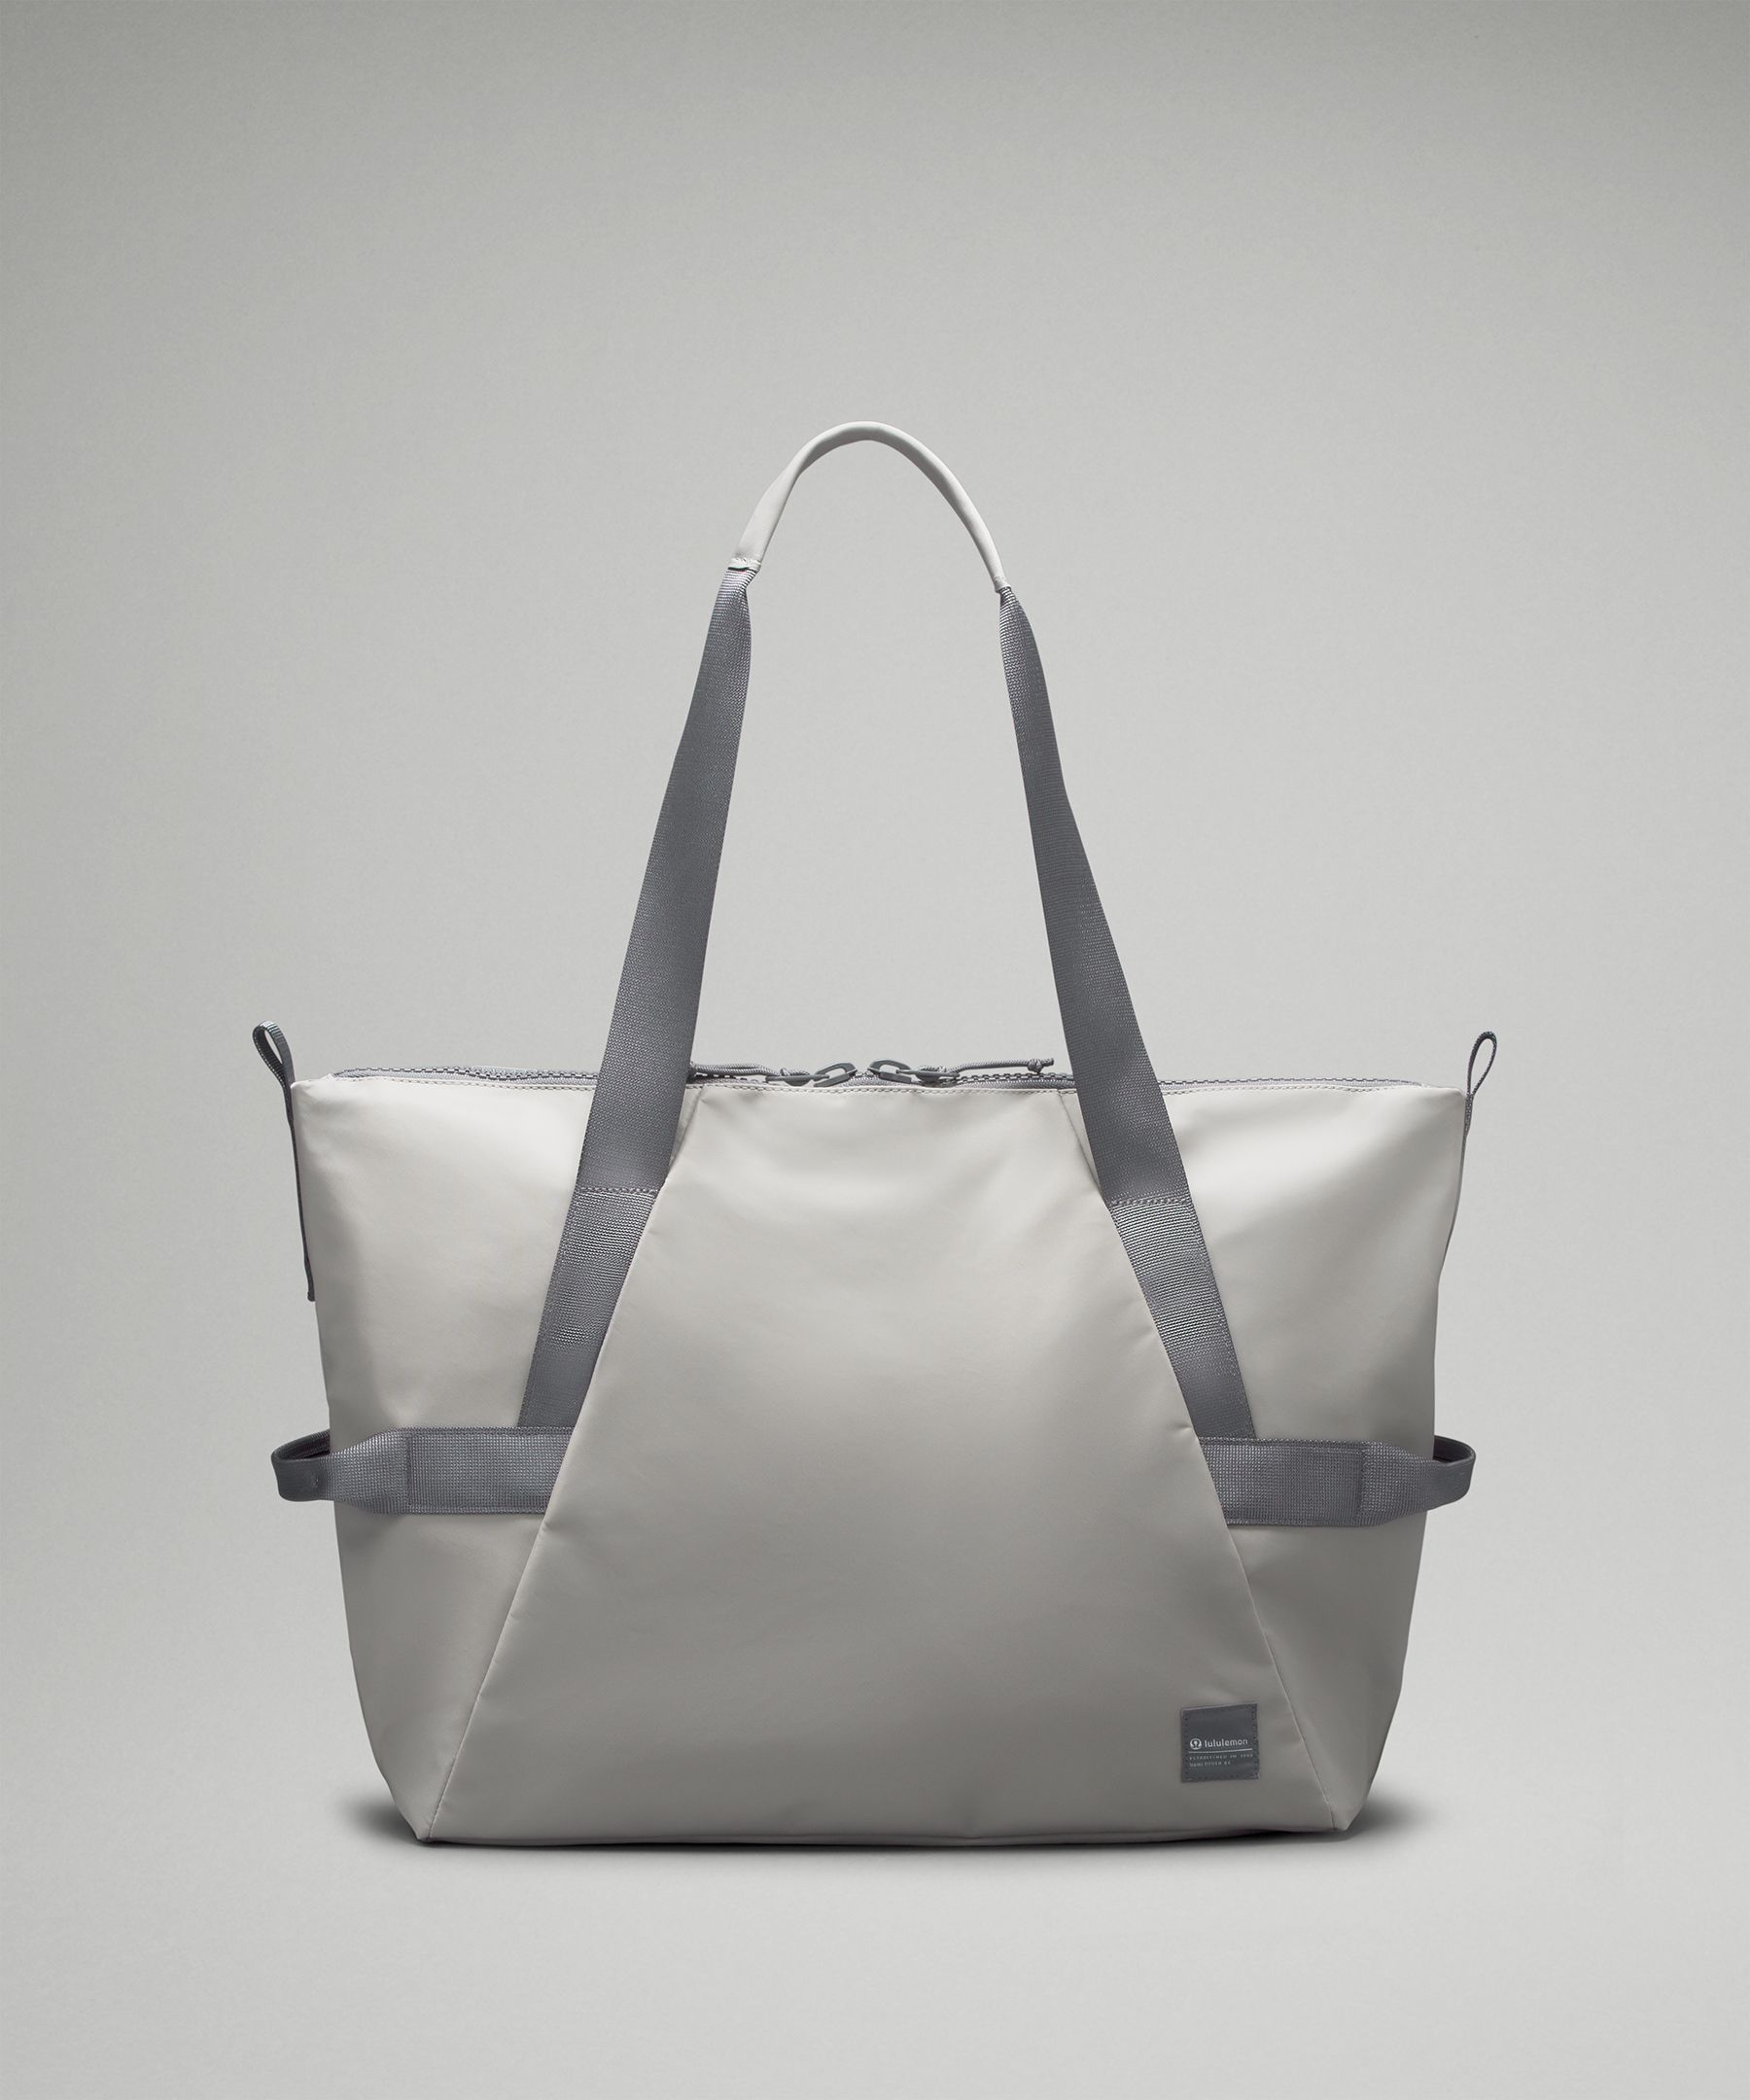 All Day Tote 2.0 - black, Women's Bags